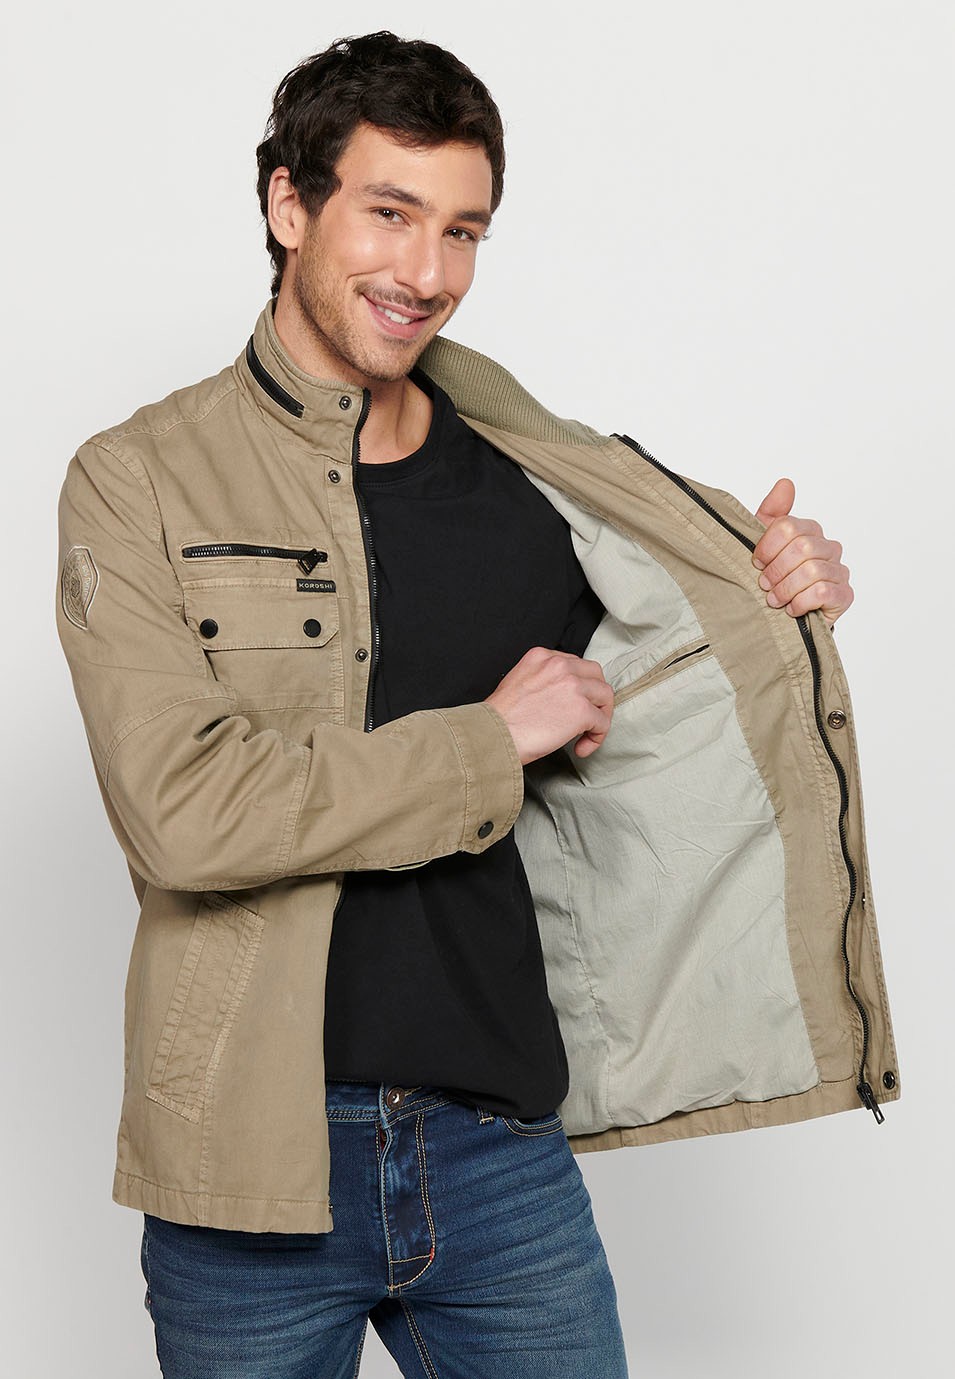 Long Jacket with Zipper Front Closure and Lapel with Stand Collar and Flap Pockets in Mink Color for Men 10